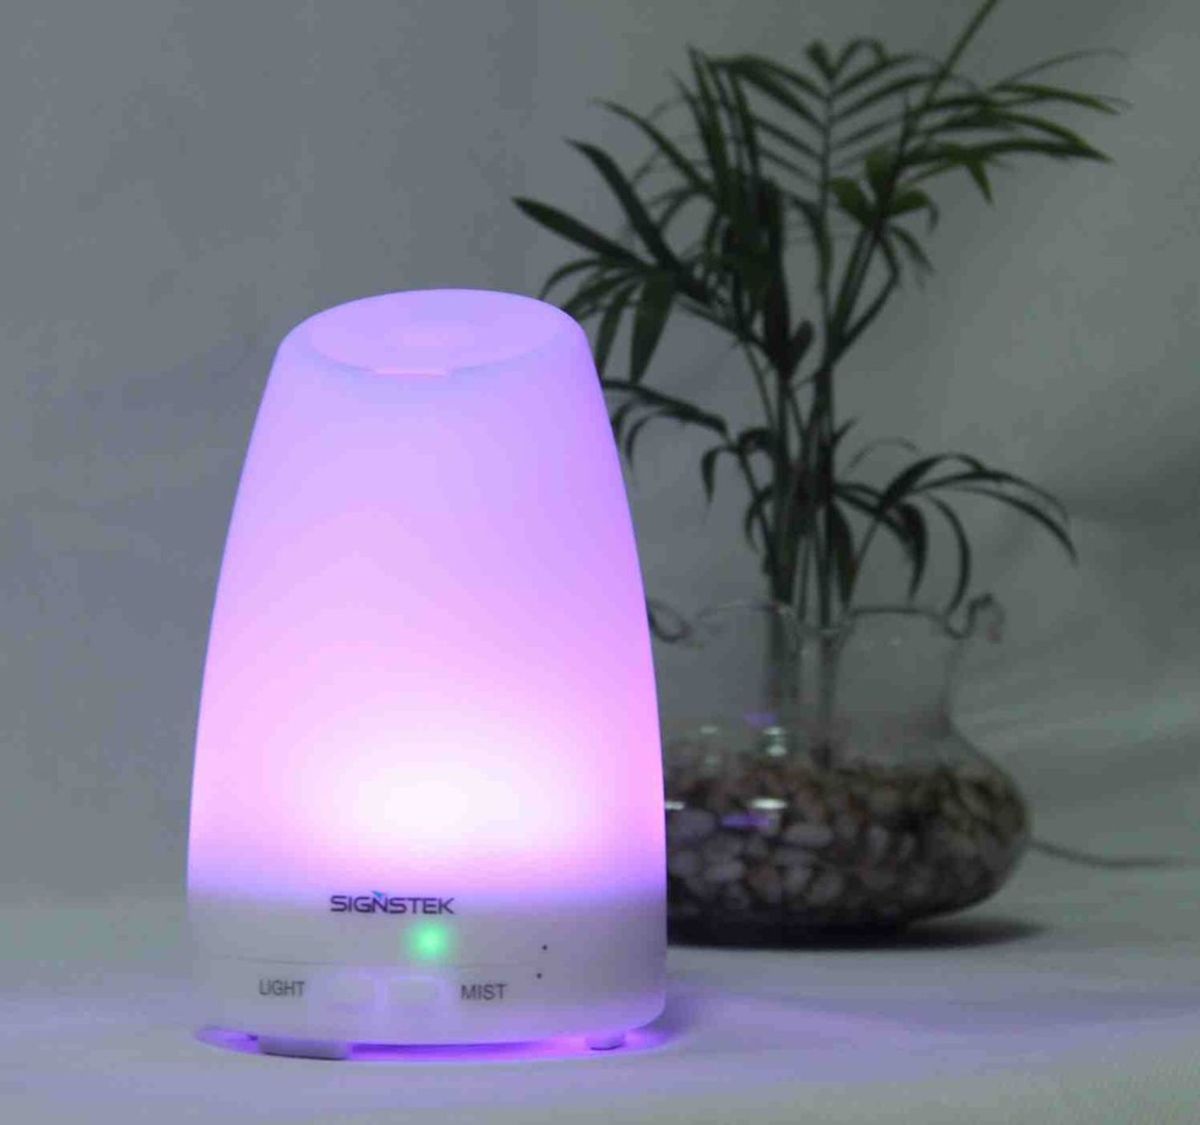 Why You Should Own an Aroma Diffuser